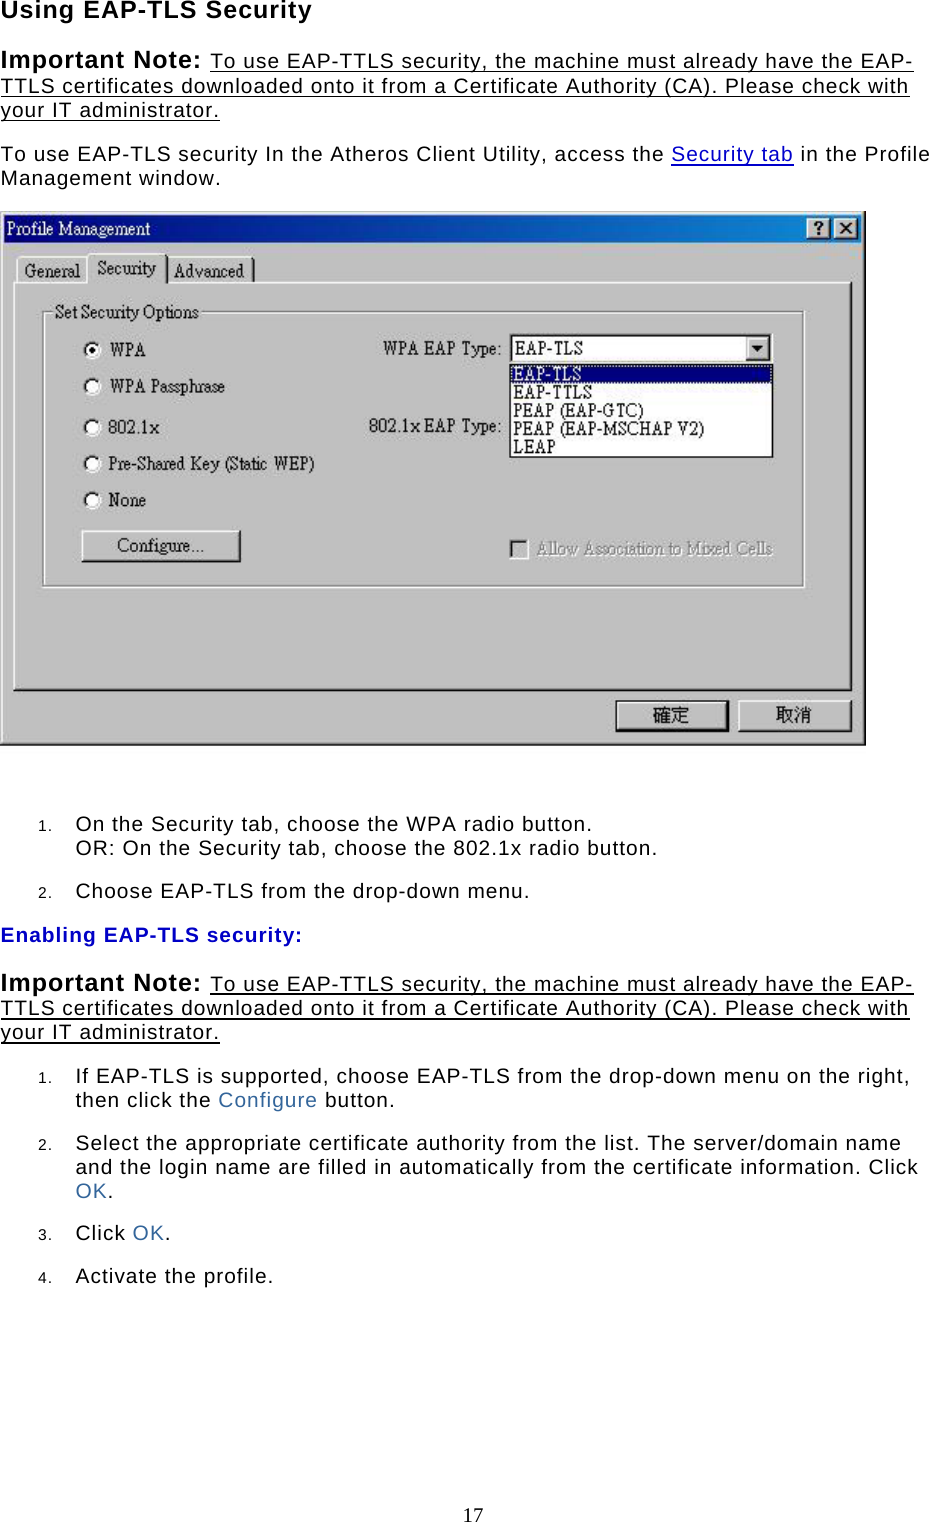  17 Using EAP-TLS Security Important Note: To use EAP-TTLS security, the machine must already have the EAP-TTLS certificates downloaded onto it from a Certificate Authority (CA). Please check with your IT administrator. To use EAP-TLS security In the Atheros Client Utility, access the Security tab in the Profile Management window.   1.  On the Security tab, choose the WPA radio button.  OR: On the Security tab, choose the 802.1x radio button.   2.  Choose EAP-TLS from the drop-down menu.  Enabling EAP-TLS security: Important Note: To use EAP-TTLS security, the machine must already have the EAP-TTLS certificates downloaded onto it from a Certificate Authority (CA). Please check with your IT administrator. 1.  If EAP-TLS is supported, choose EAP-TLS from the drop-down menu on the right, then click the Configure button.  2.  Select the appropriate certificate authority from the list. The server/domain name and the login name are filled in automatically from the certificate information. Click OK.  3.  Click OK.  4.  Activate the profile.       